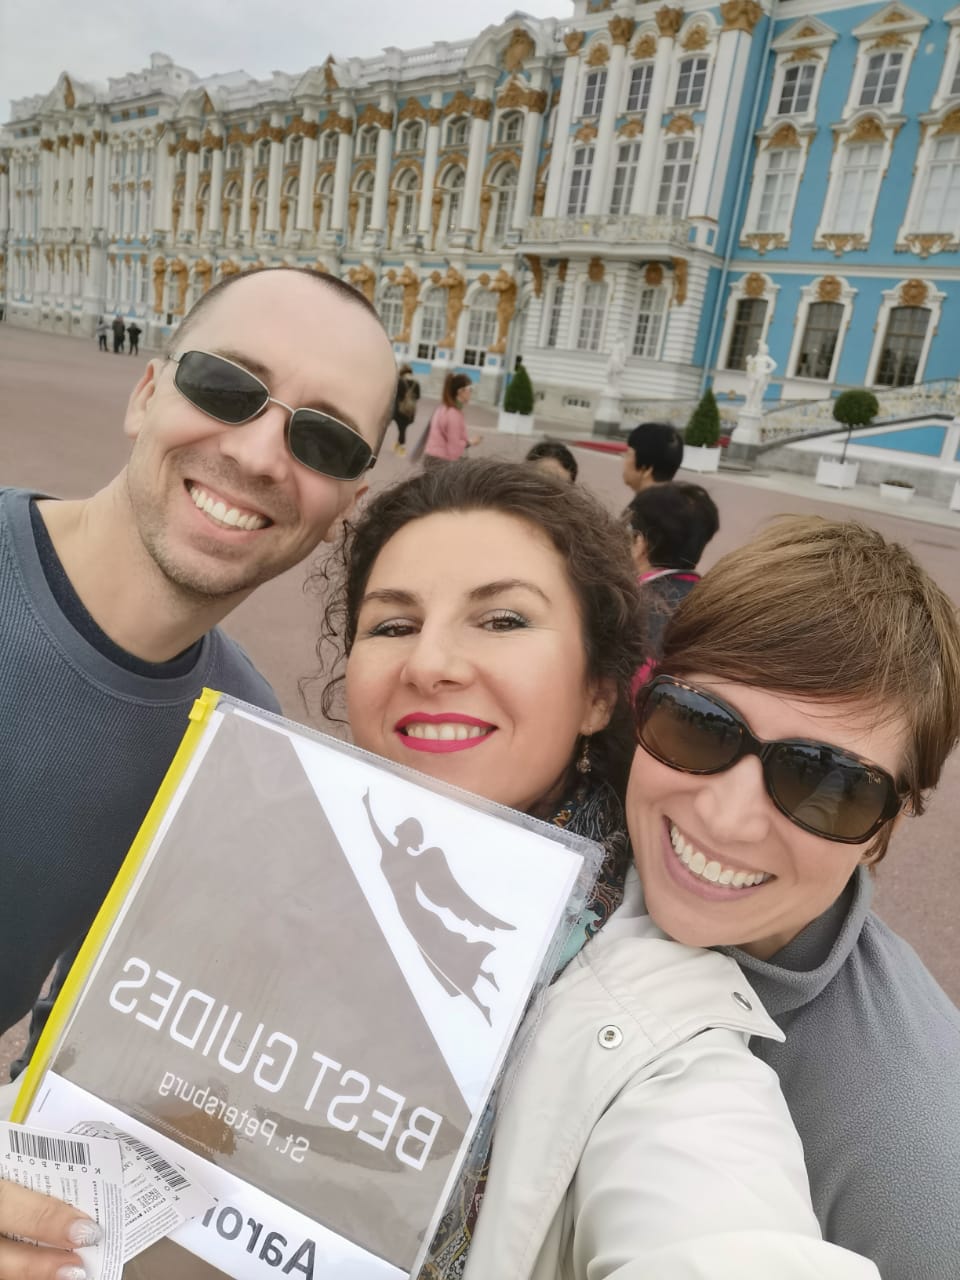 St Petersburg Russia tours: Cheerful tourists and their guide